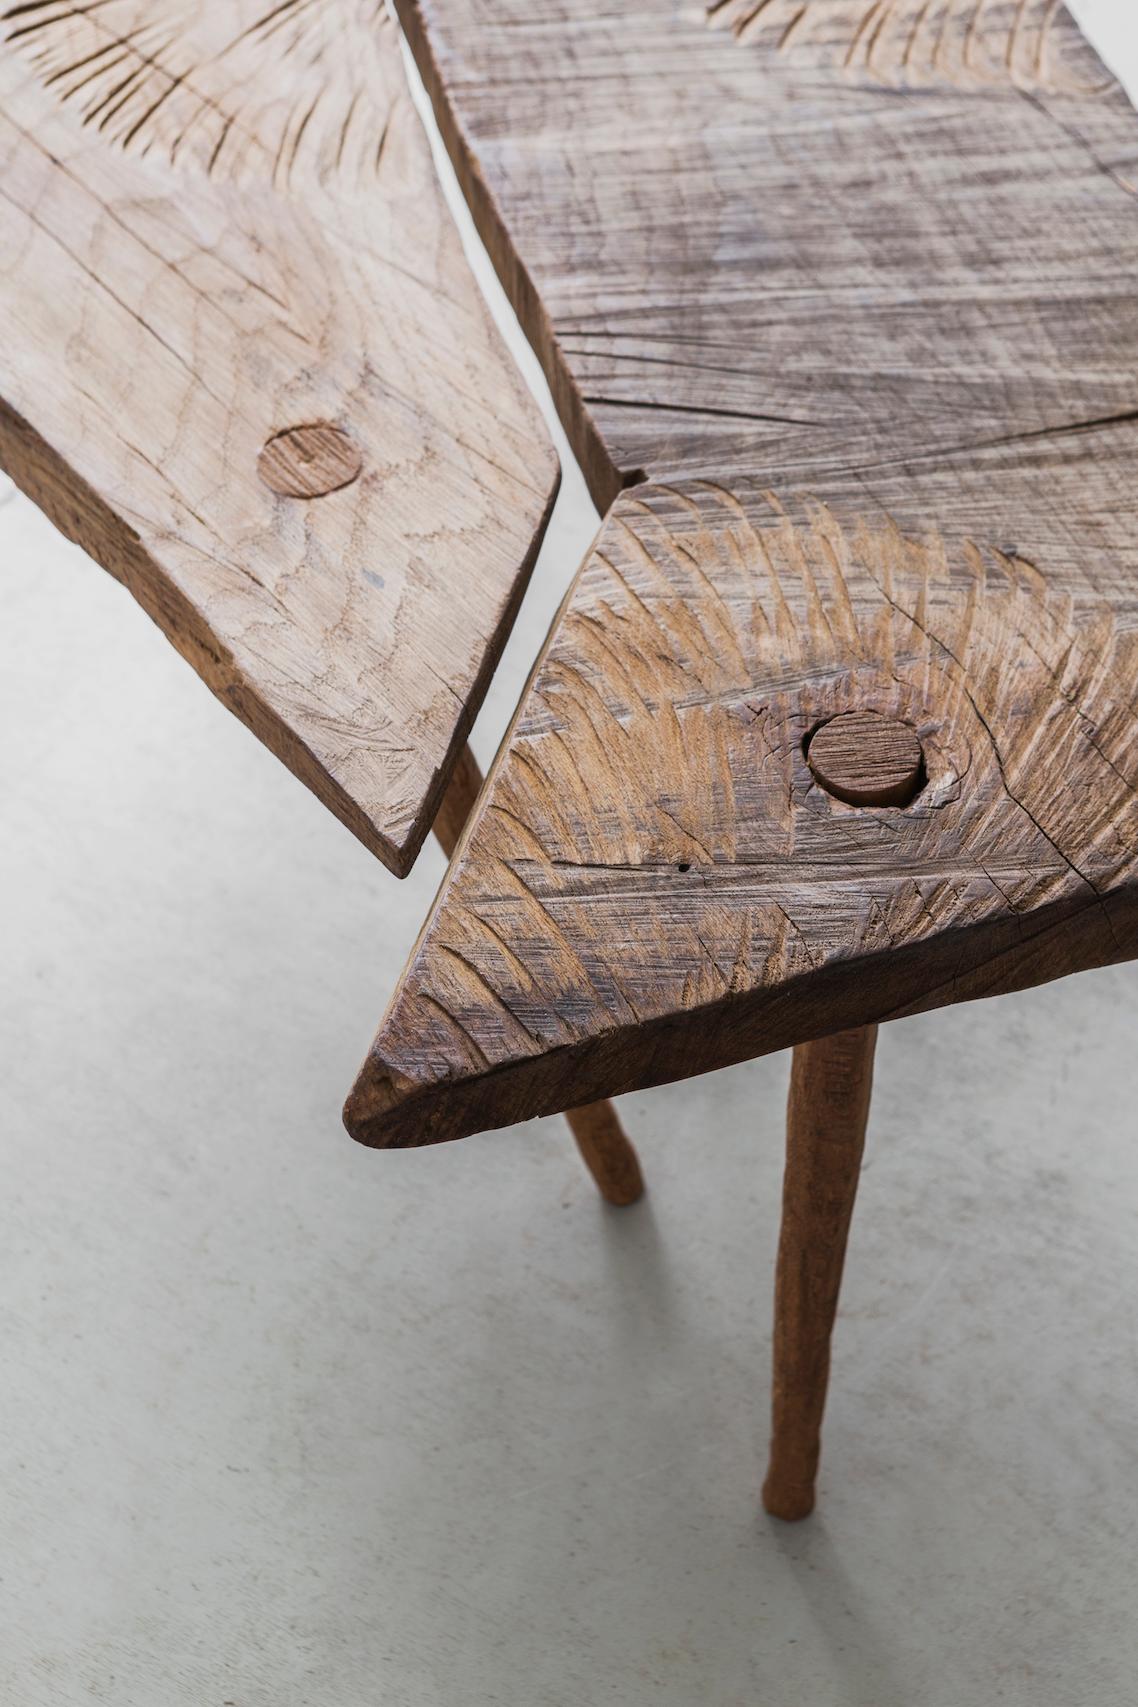 Small table made of solid oak (+ linseed oil)
Measures: 60 x 122 x 45 cm.

SÓHA design studio conceives and produces furniture design and decorative objects in solid oak in an authentic style. Inspiration to create all these items comes from the